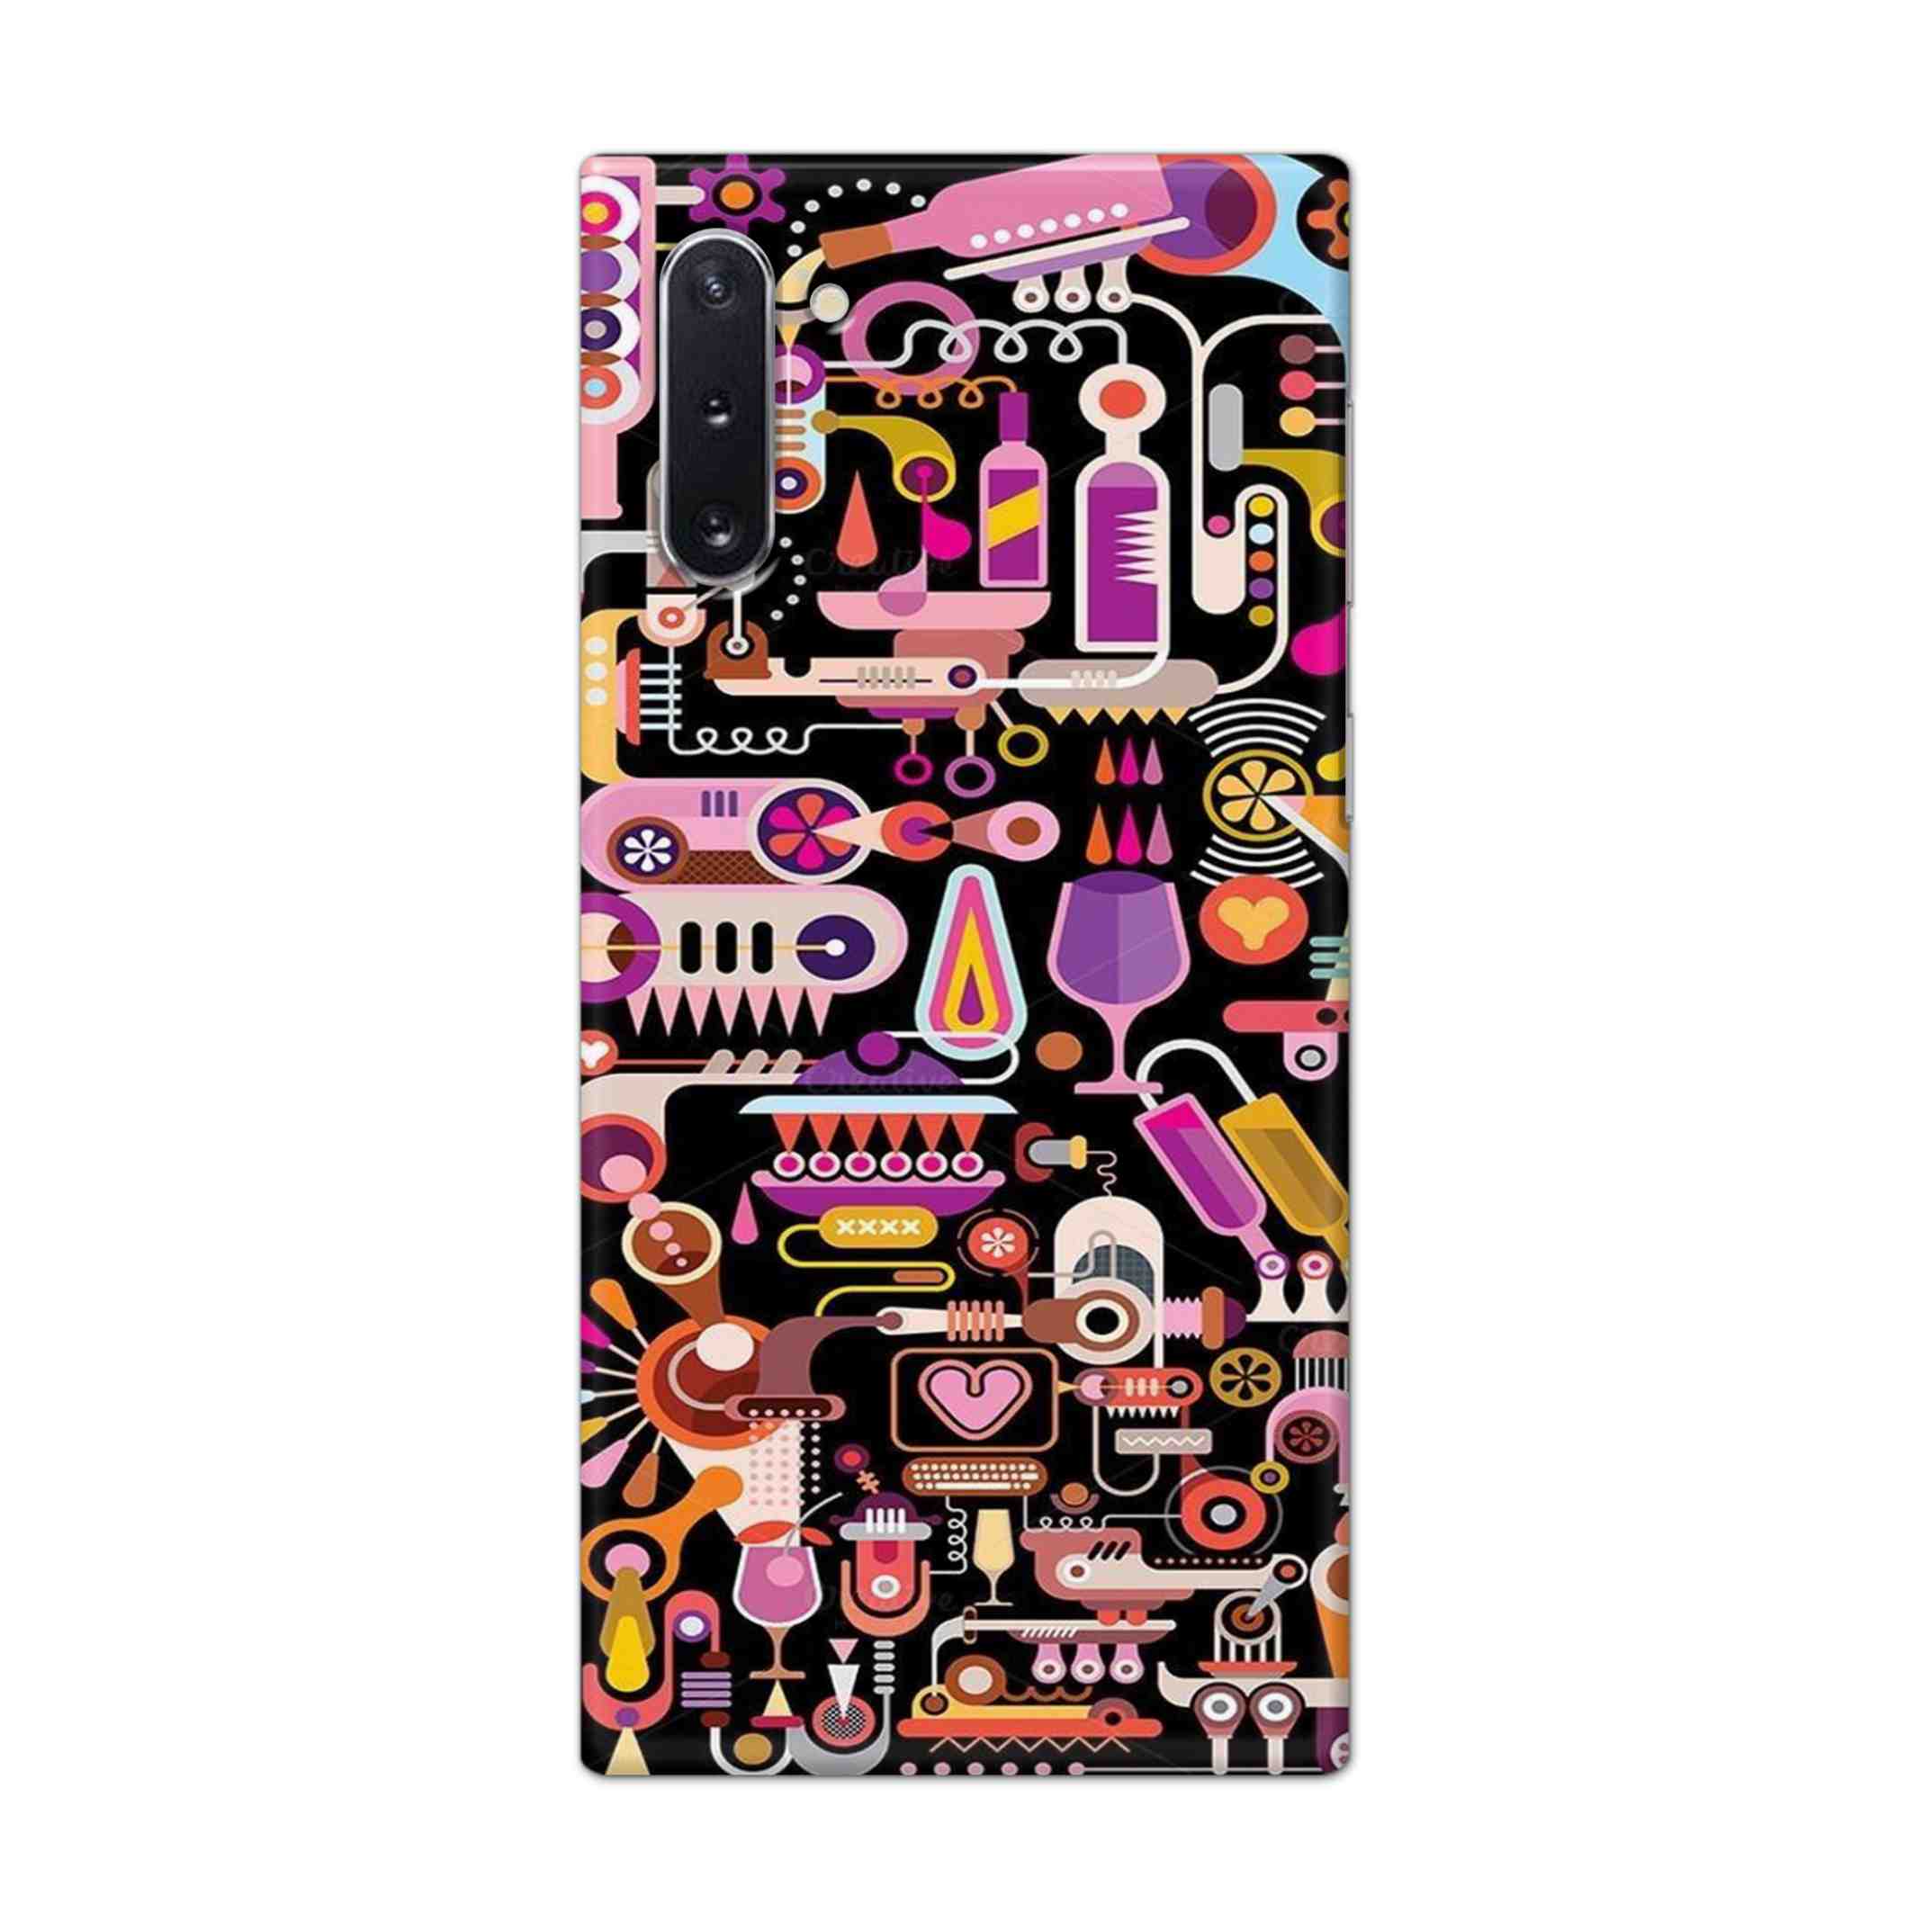 Buy Lab Art Hard Back Mobile Phone Case Cover For Samsung Galaxy Note 10 Online